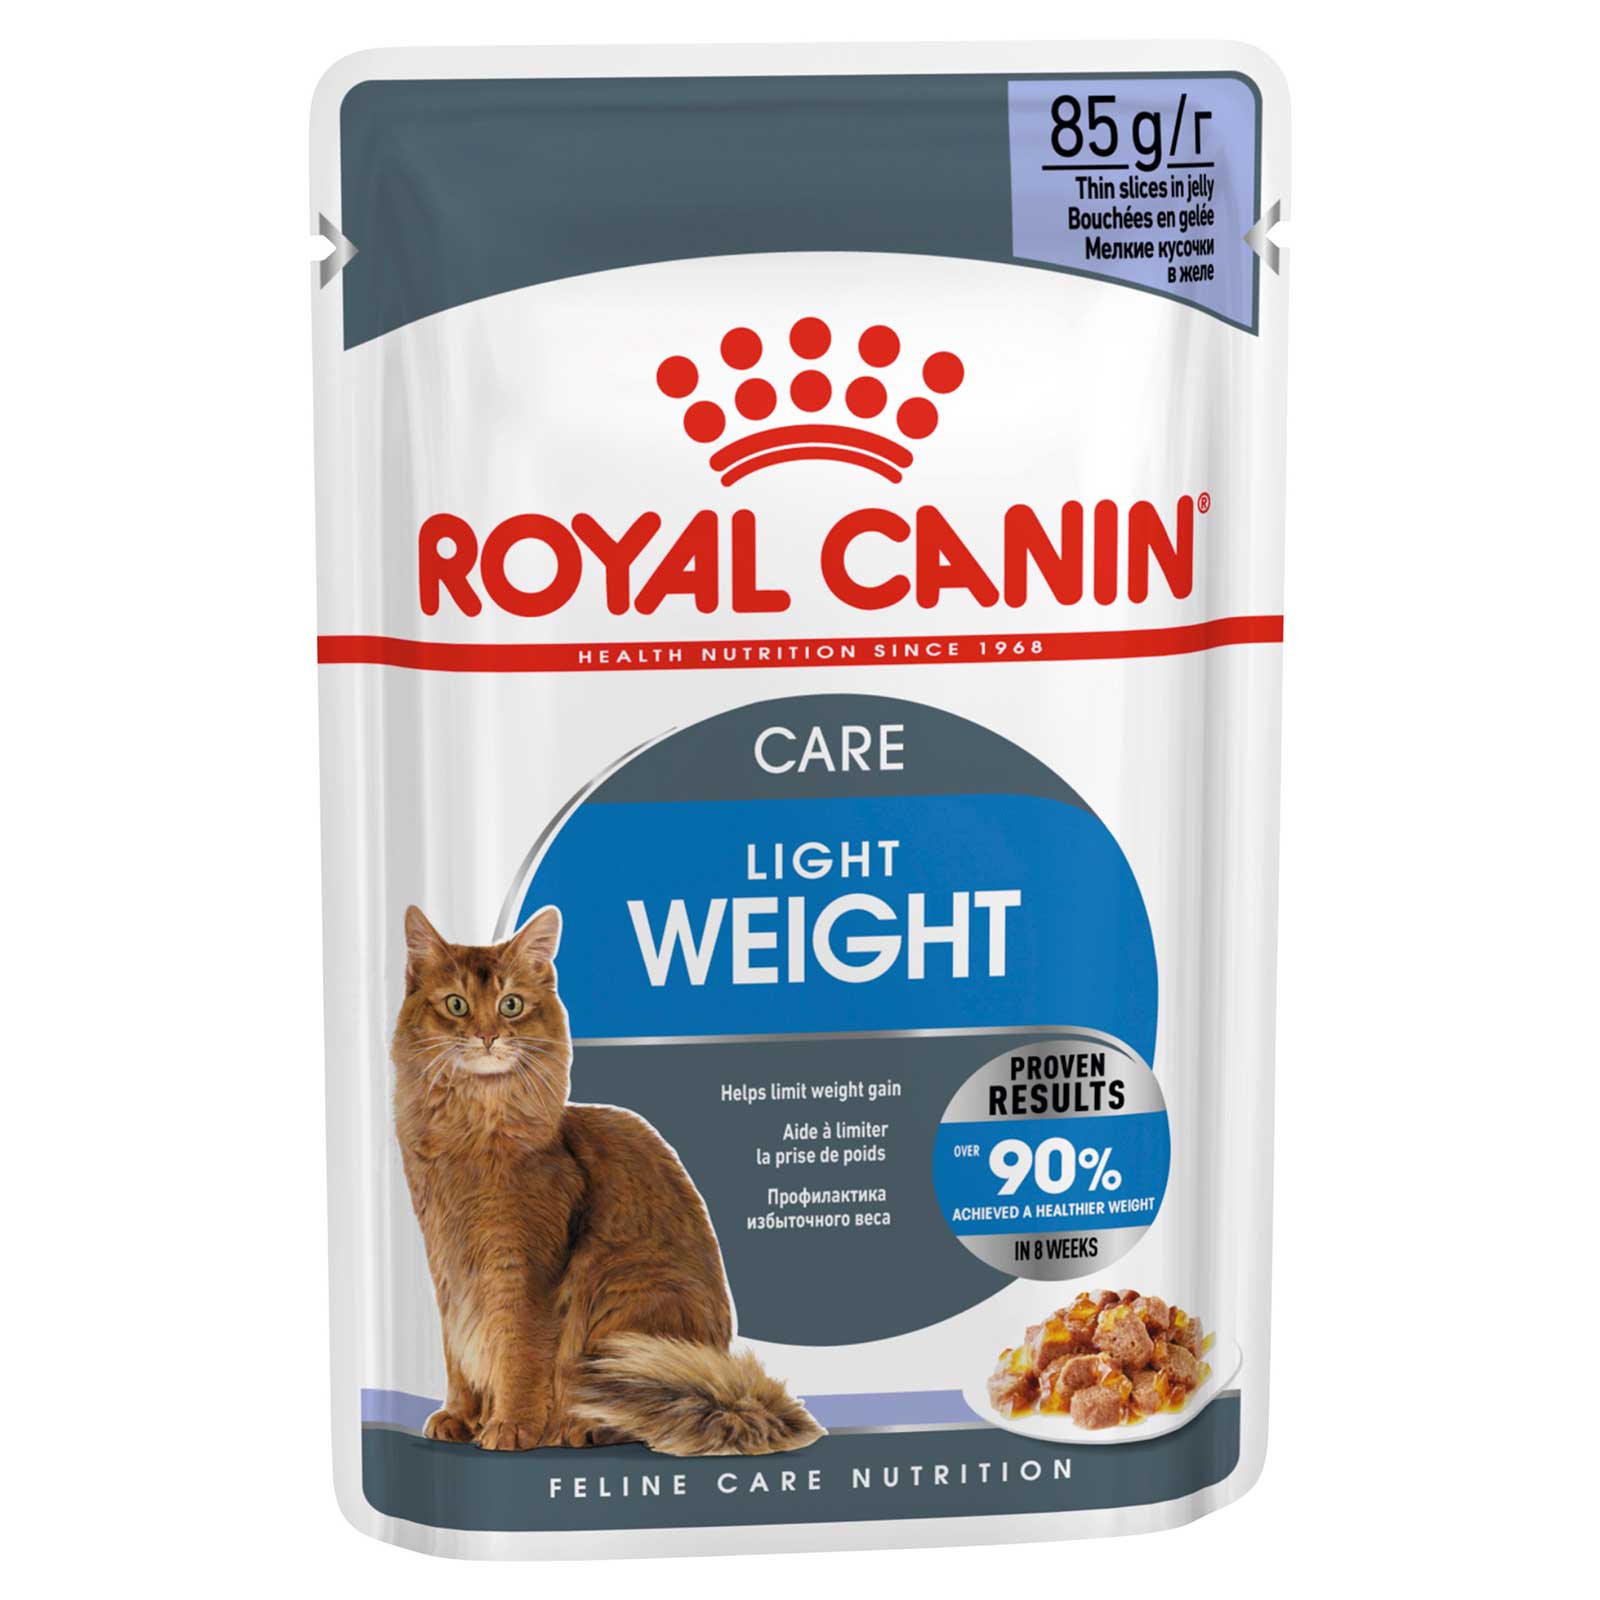 Royal Canin Cat Food Pouch Adult Light Weight in Jelly